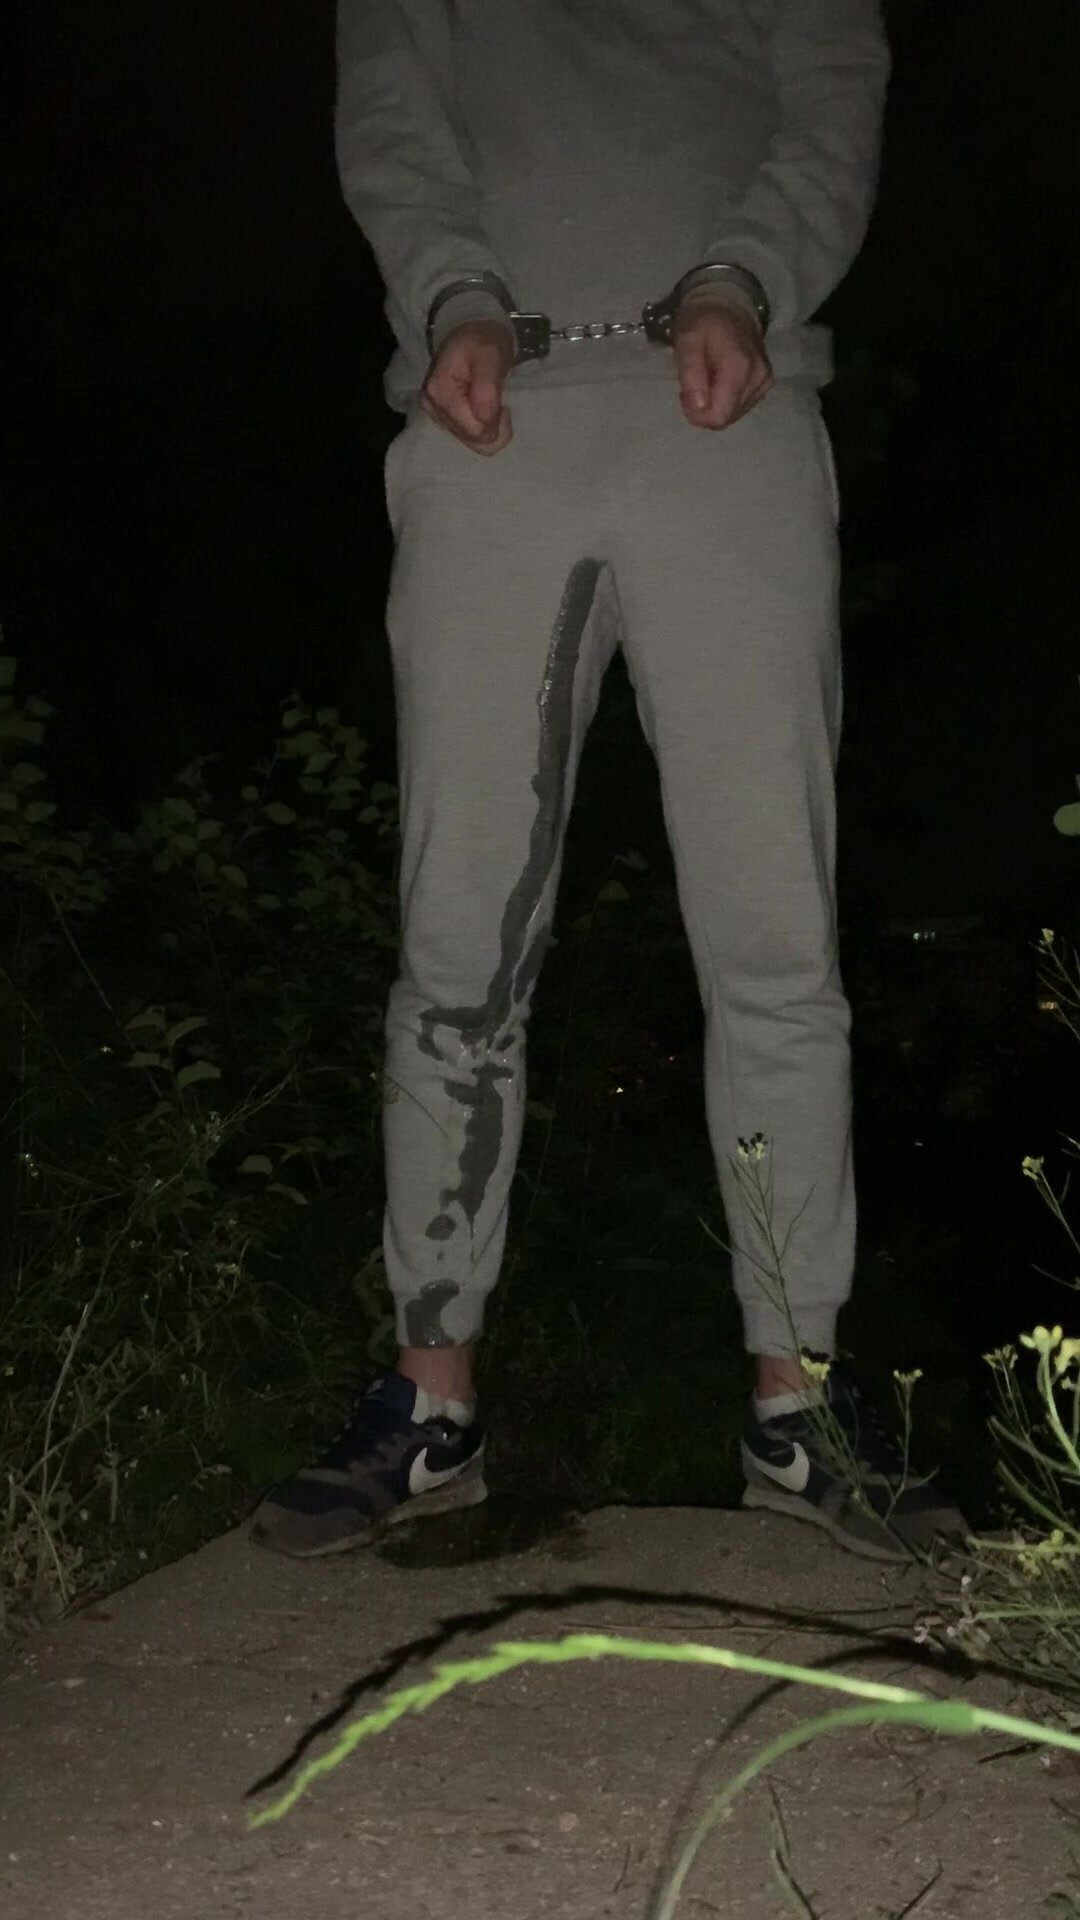 Self pissing outdoors while wearing cuffs